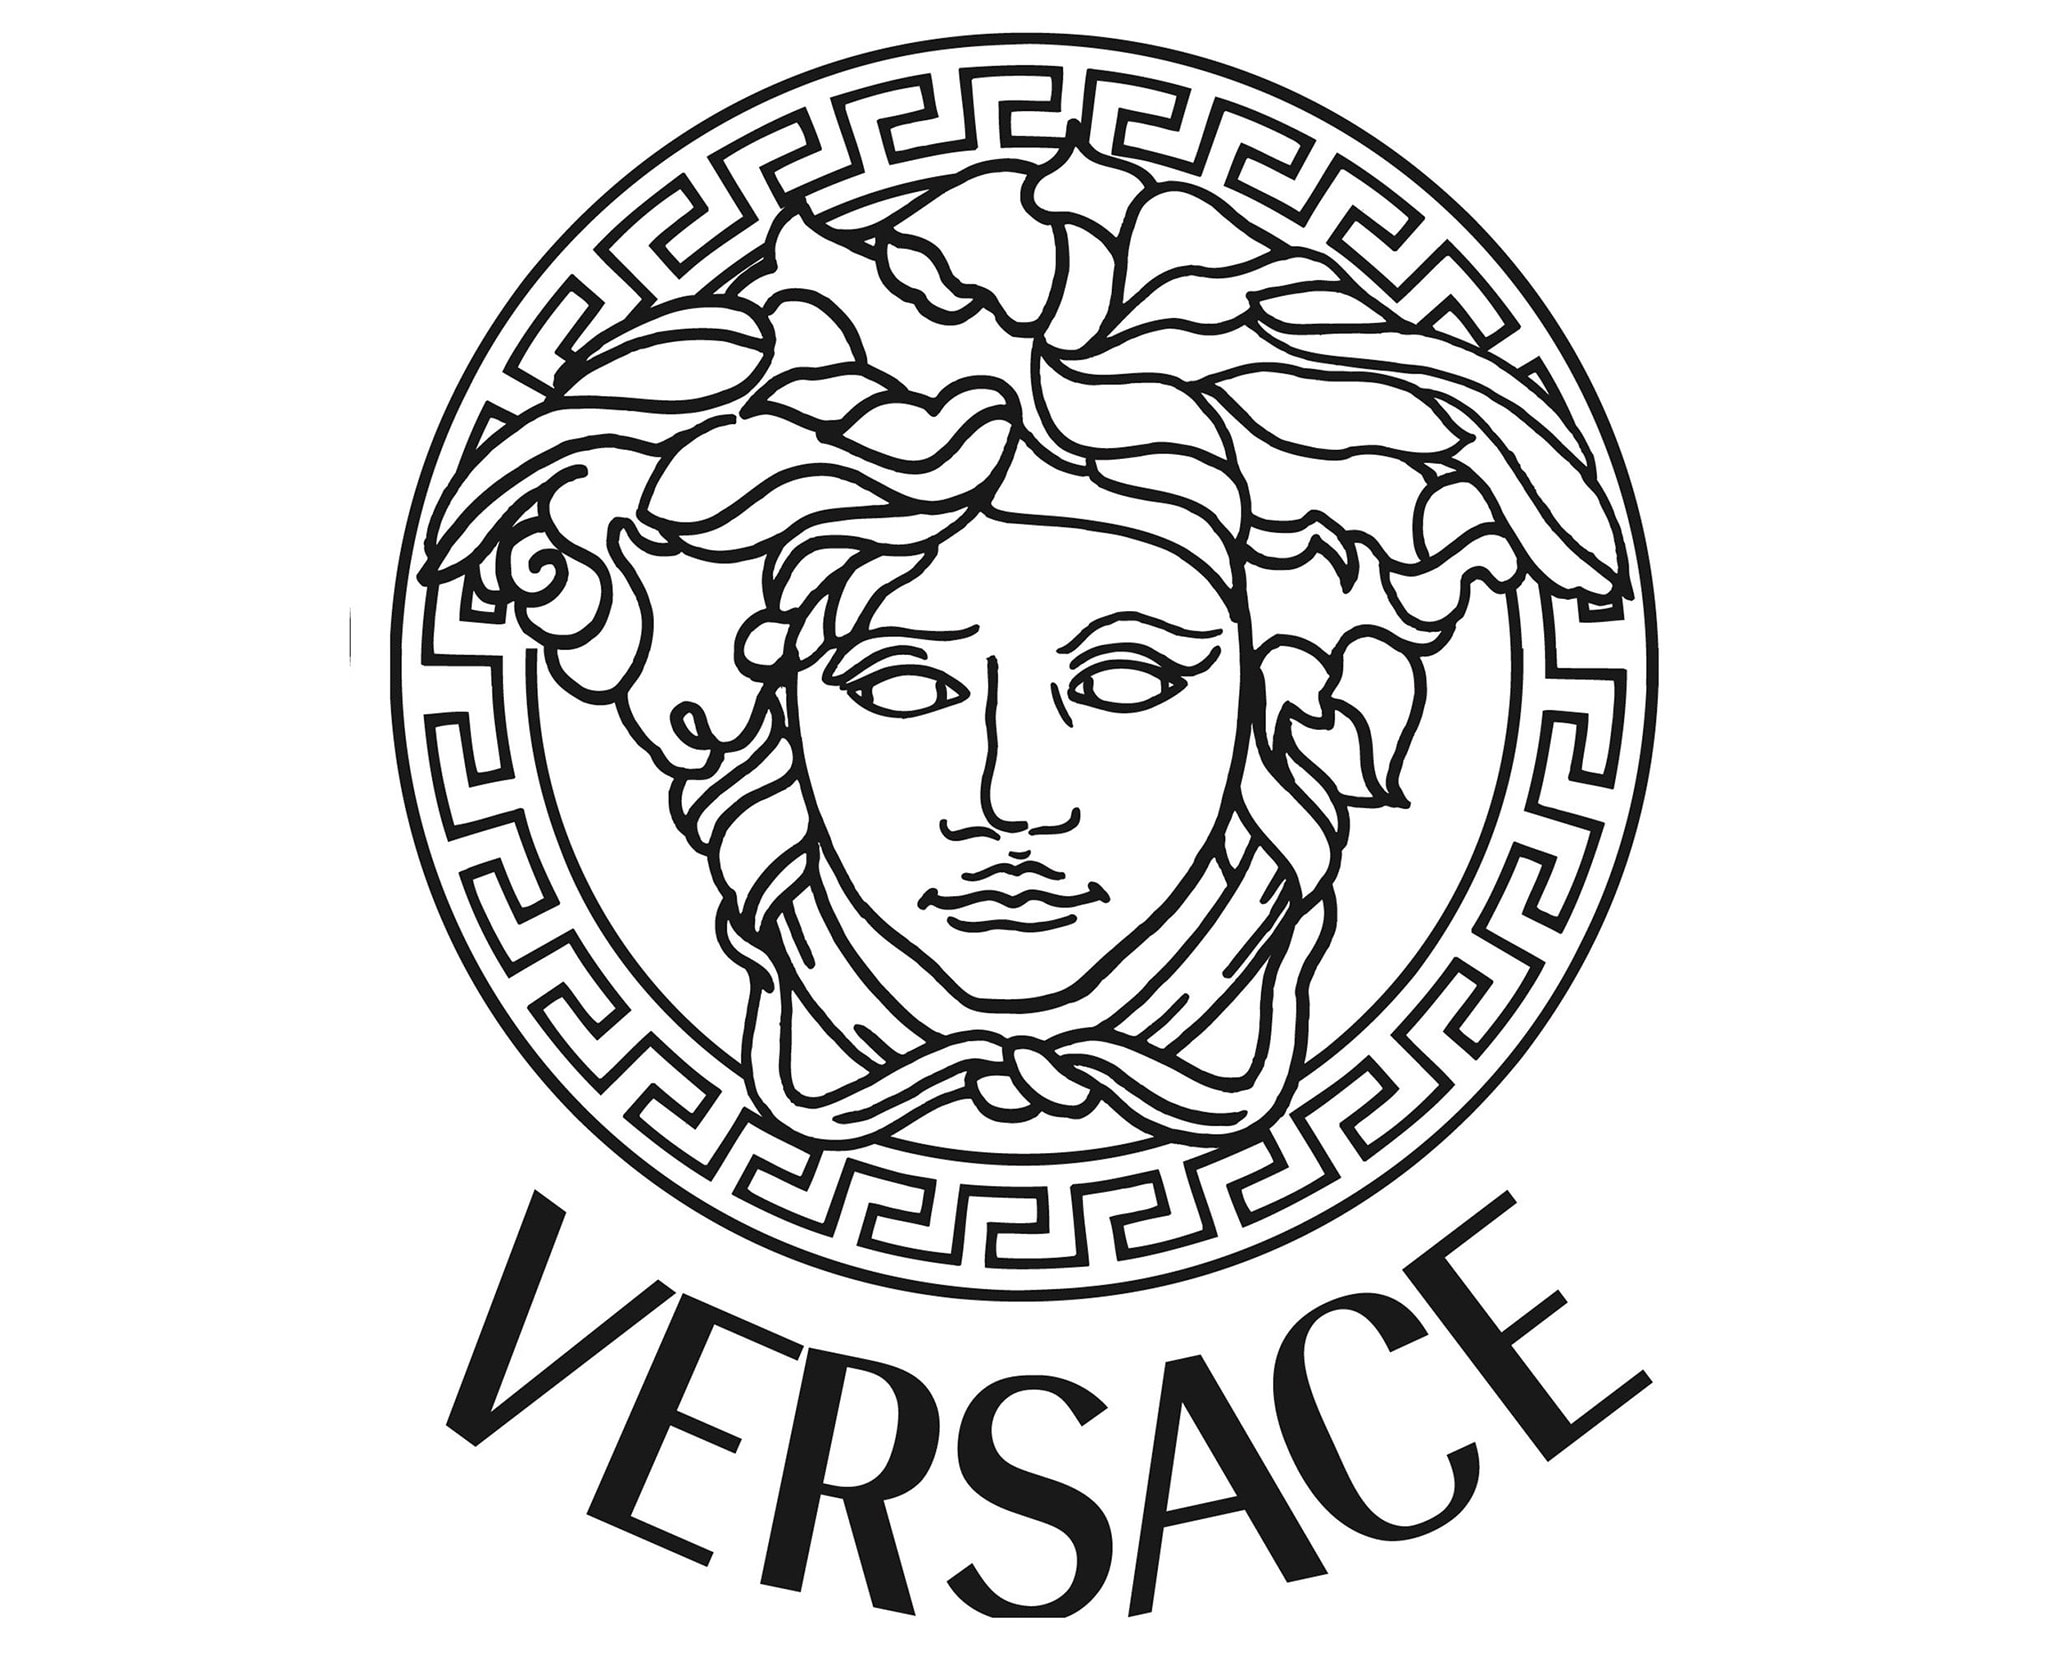 Versace was founded in 1978 by Gianni Versace, but it was only in 1993 that the Medusa logo was introduced